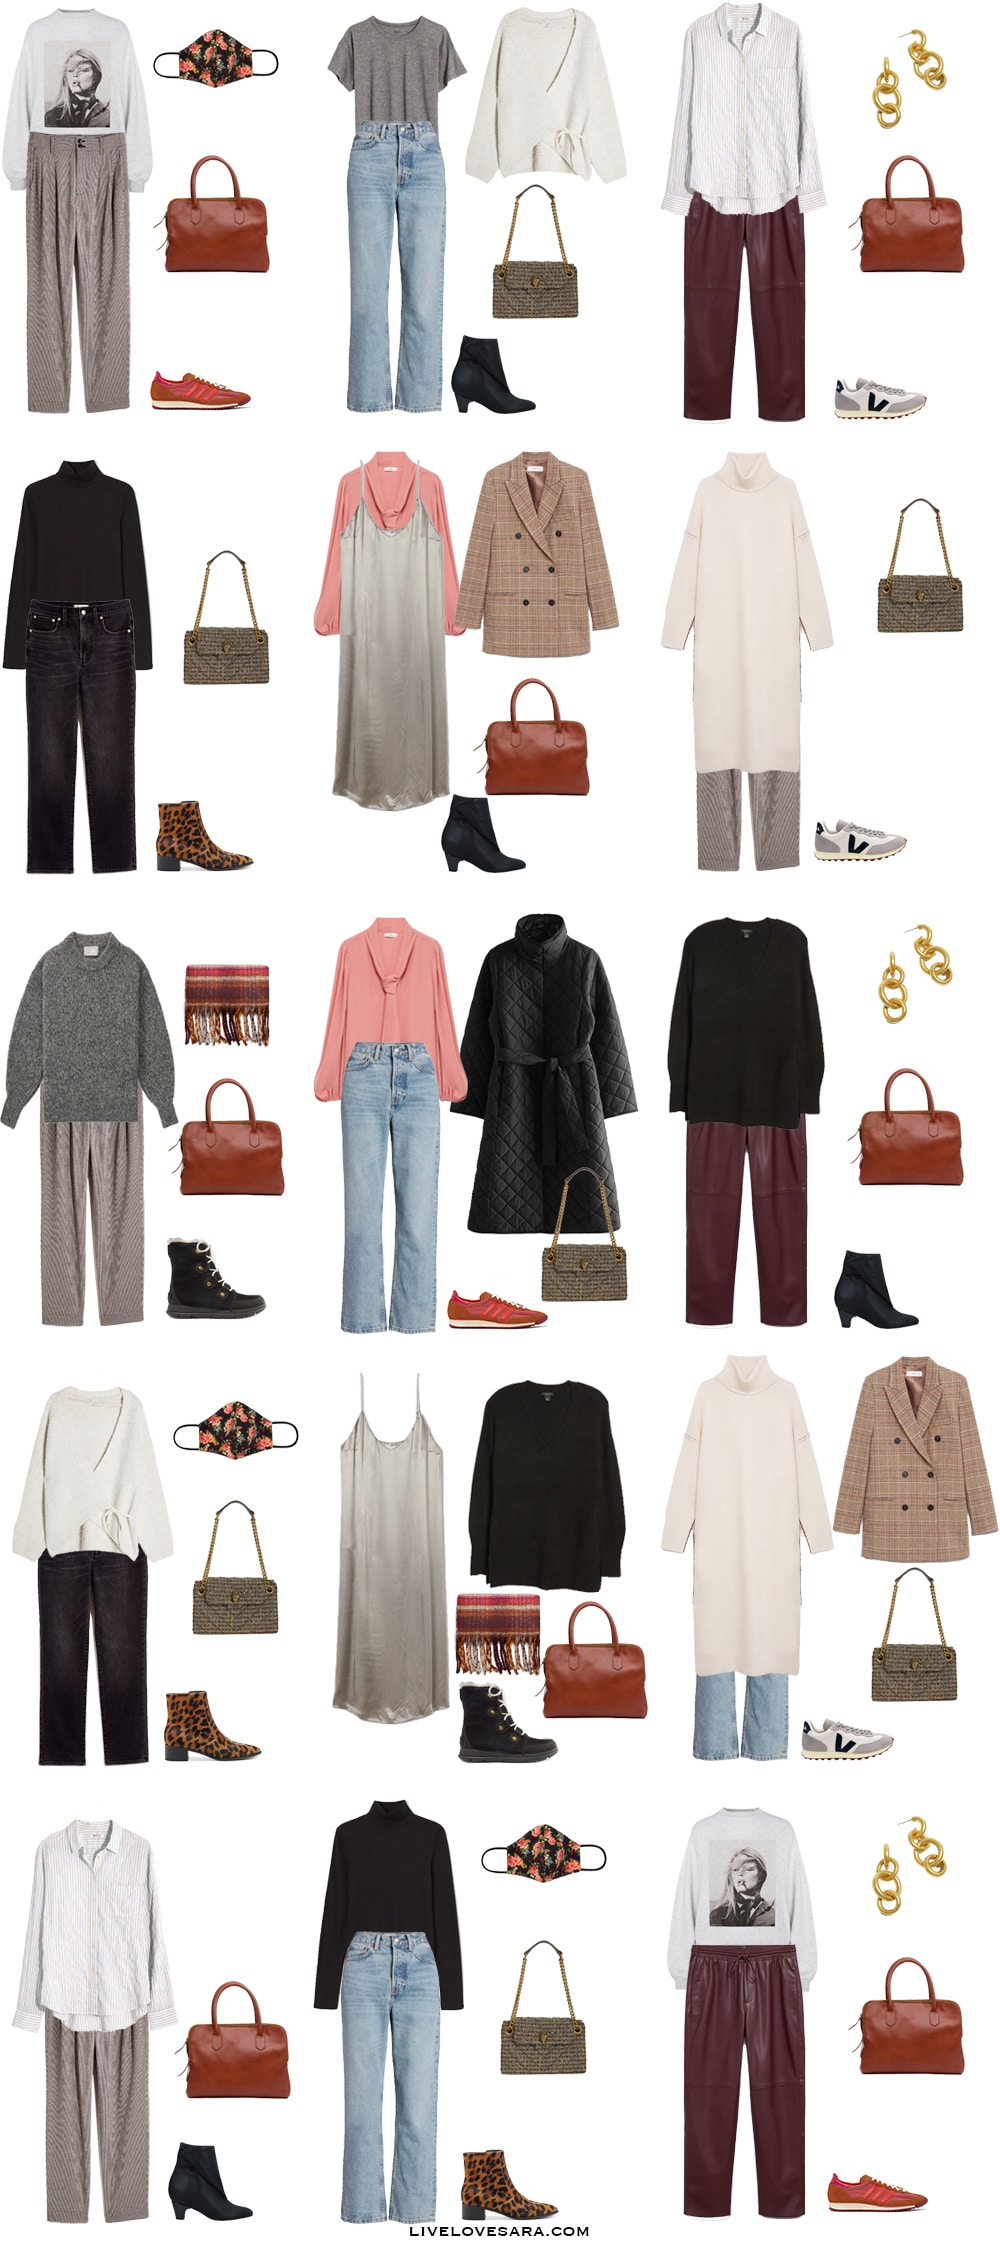 How to Build a Minimalist Winter Capsule Wardrobe Outfits 1-15